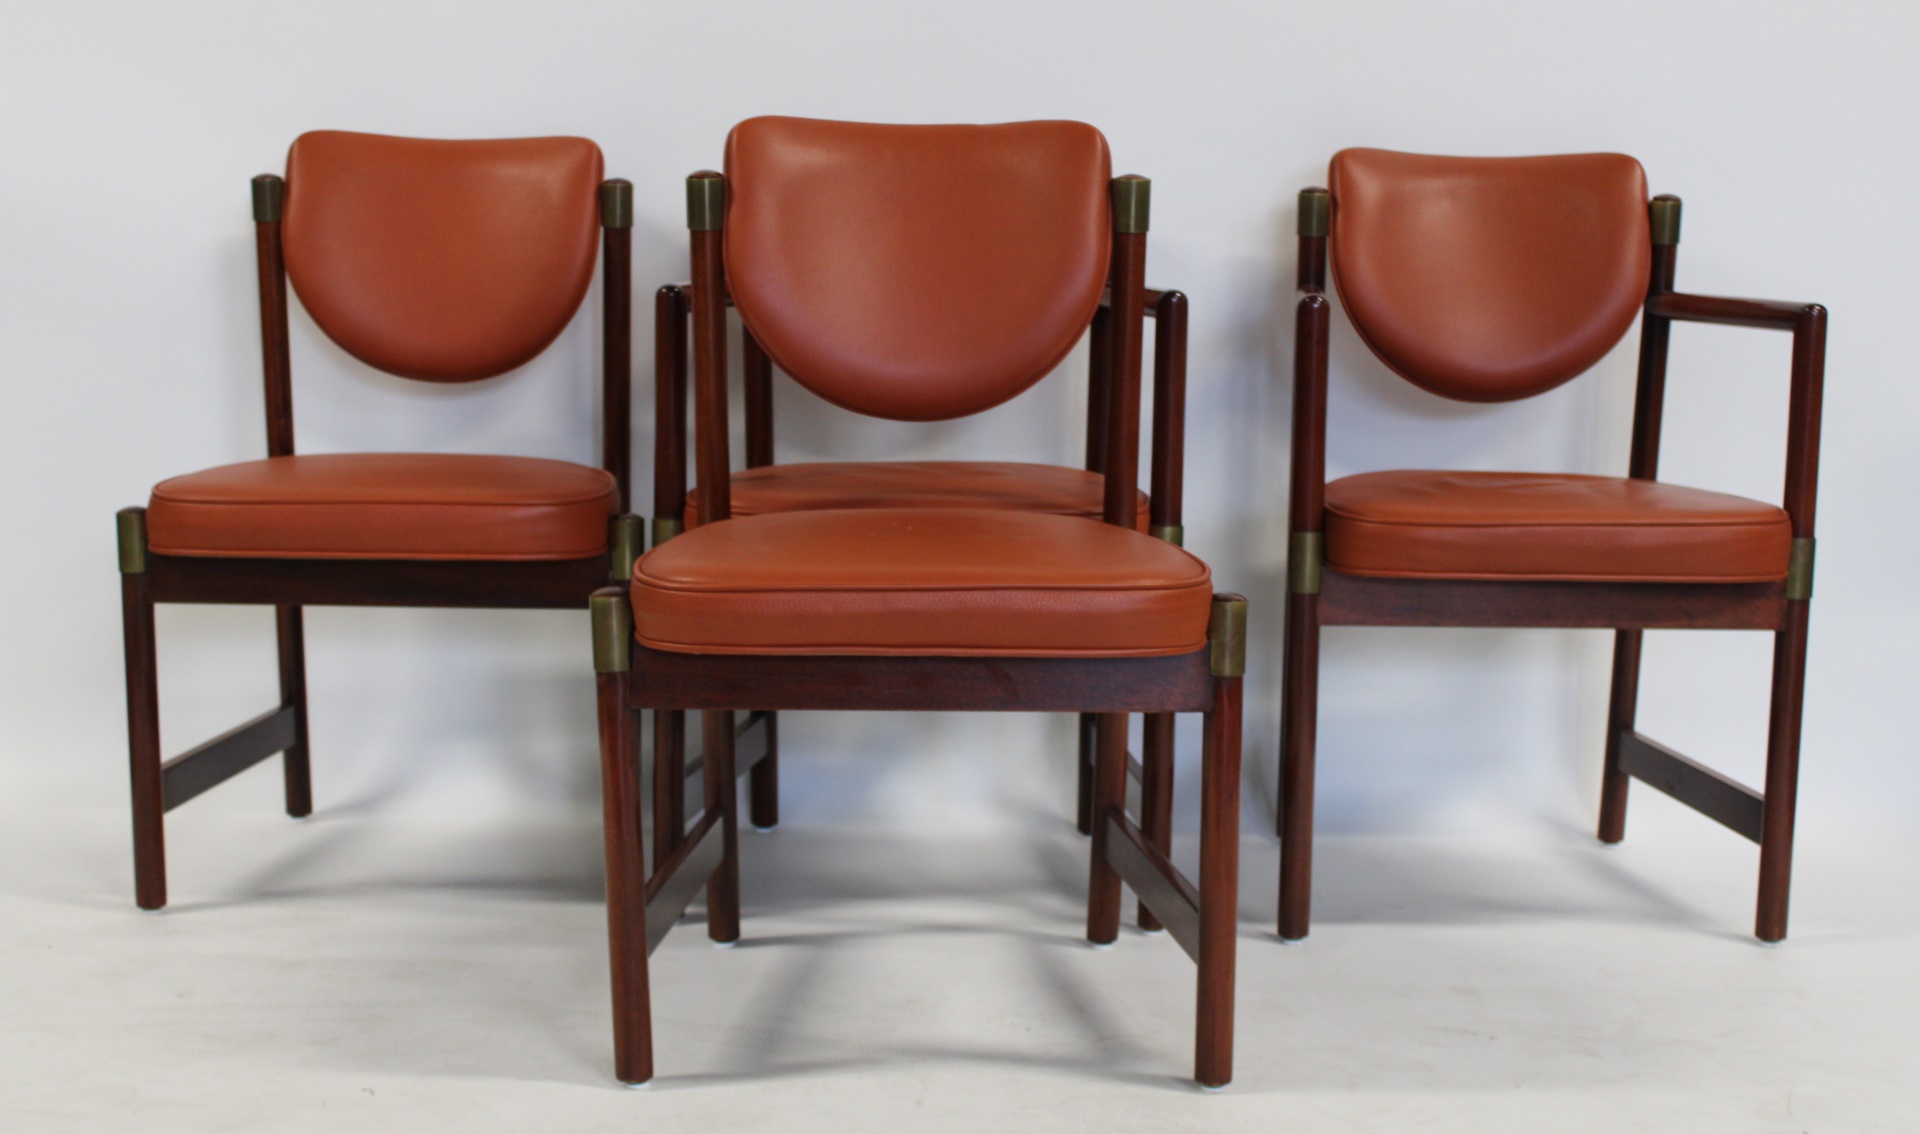 4 MIDCENTURY CHAIRS WITH BRASS 3ba142